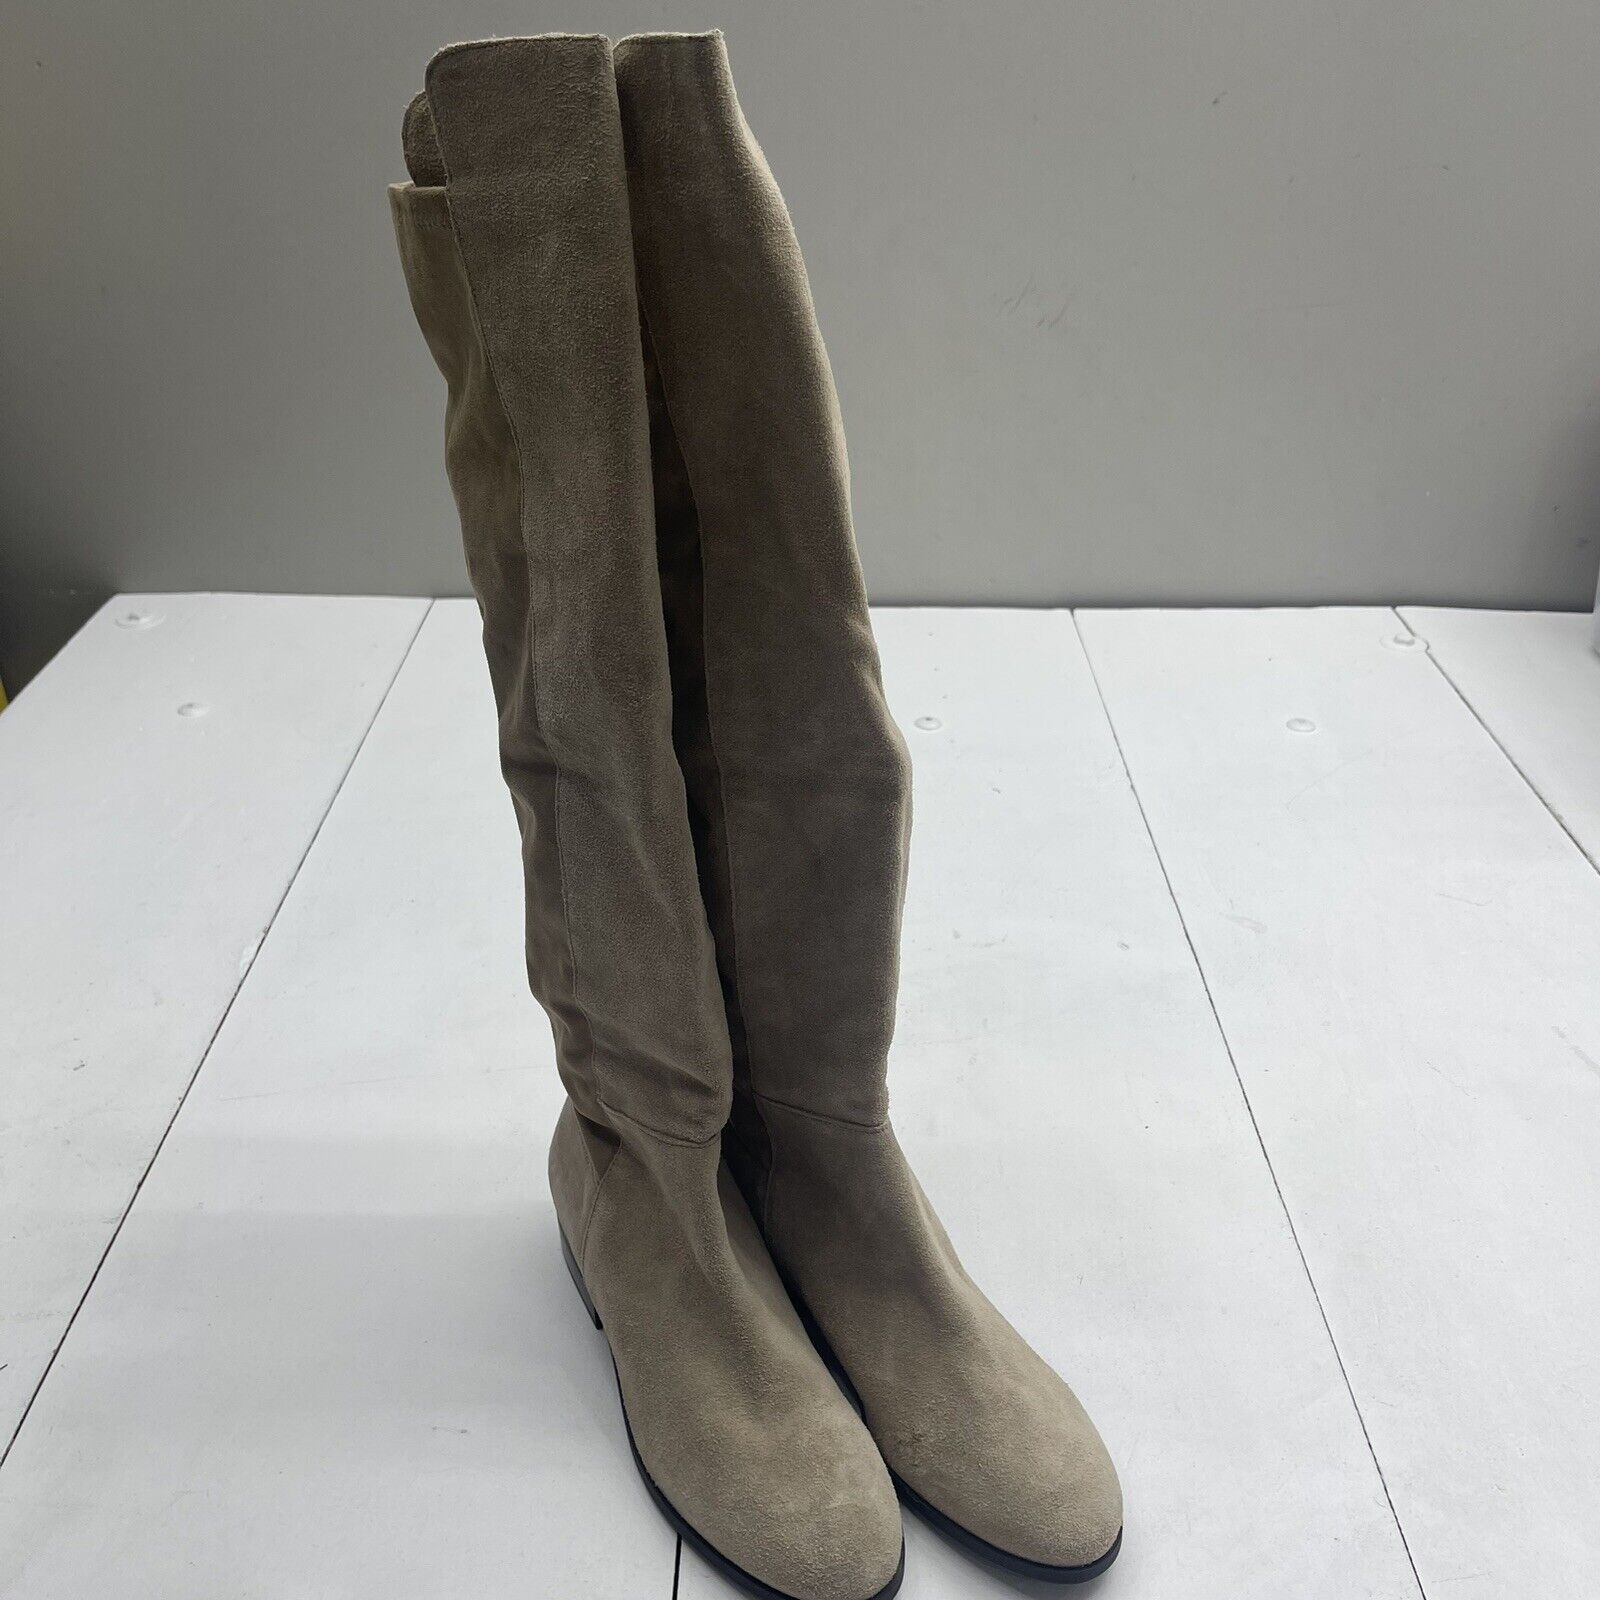 Lucky Brand Calypso Over The Knee Beige Suede Boots Women’s Size 7.5